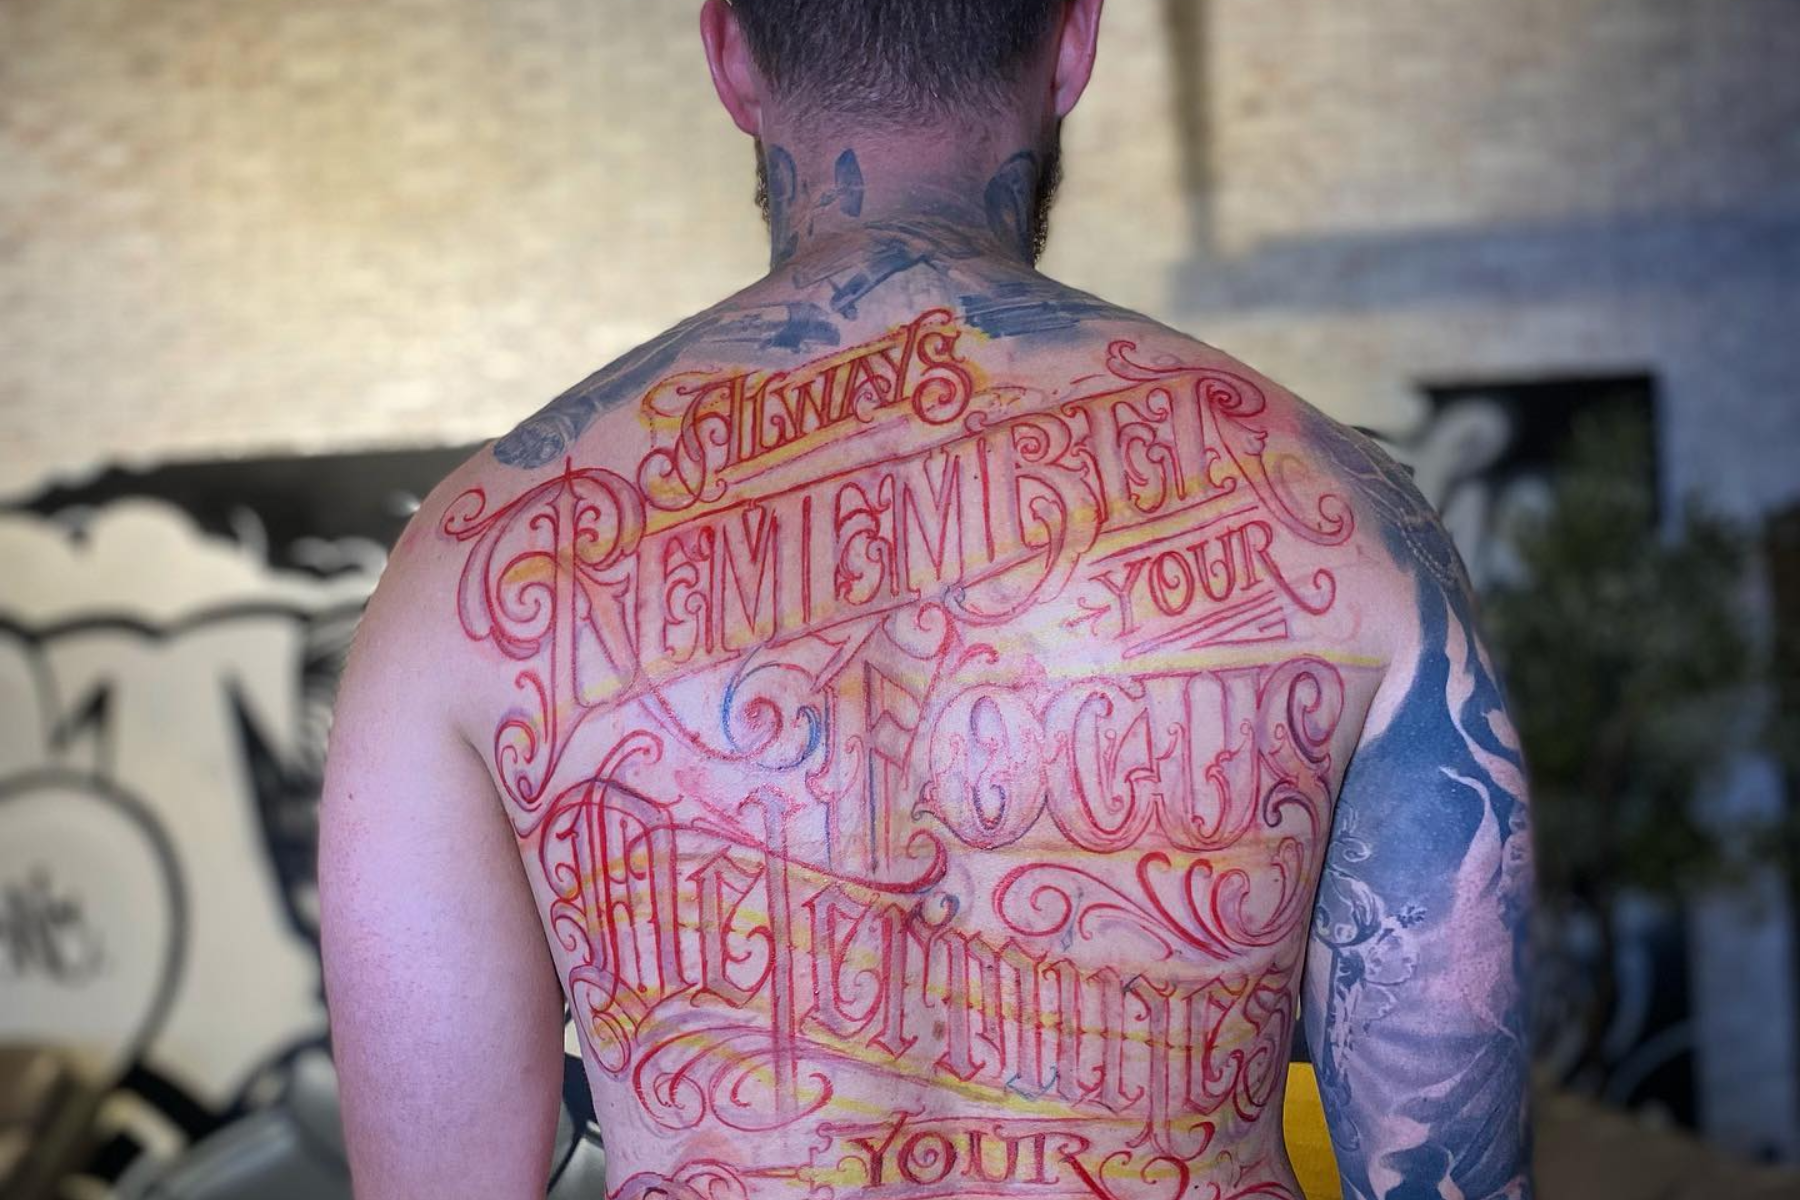 A man with a full back text tattoo